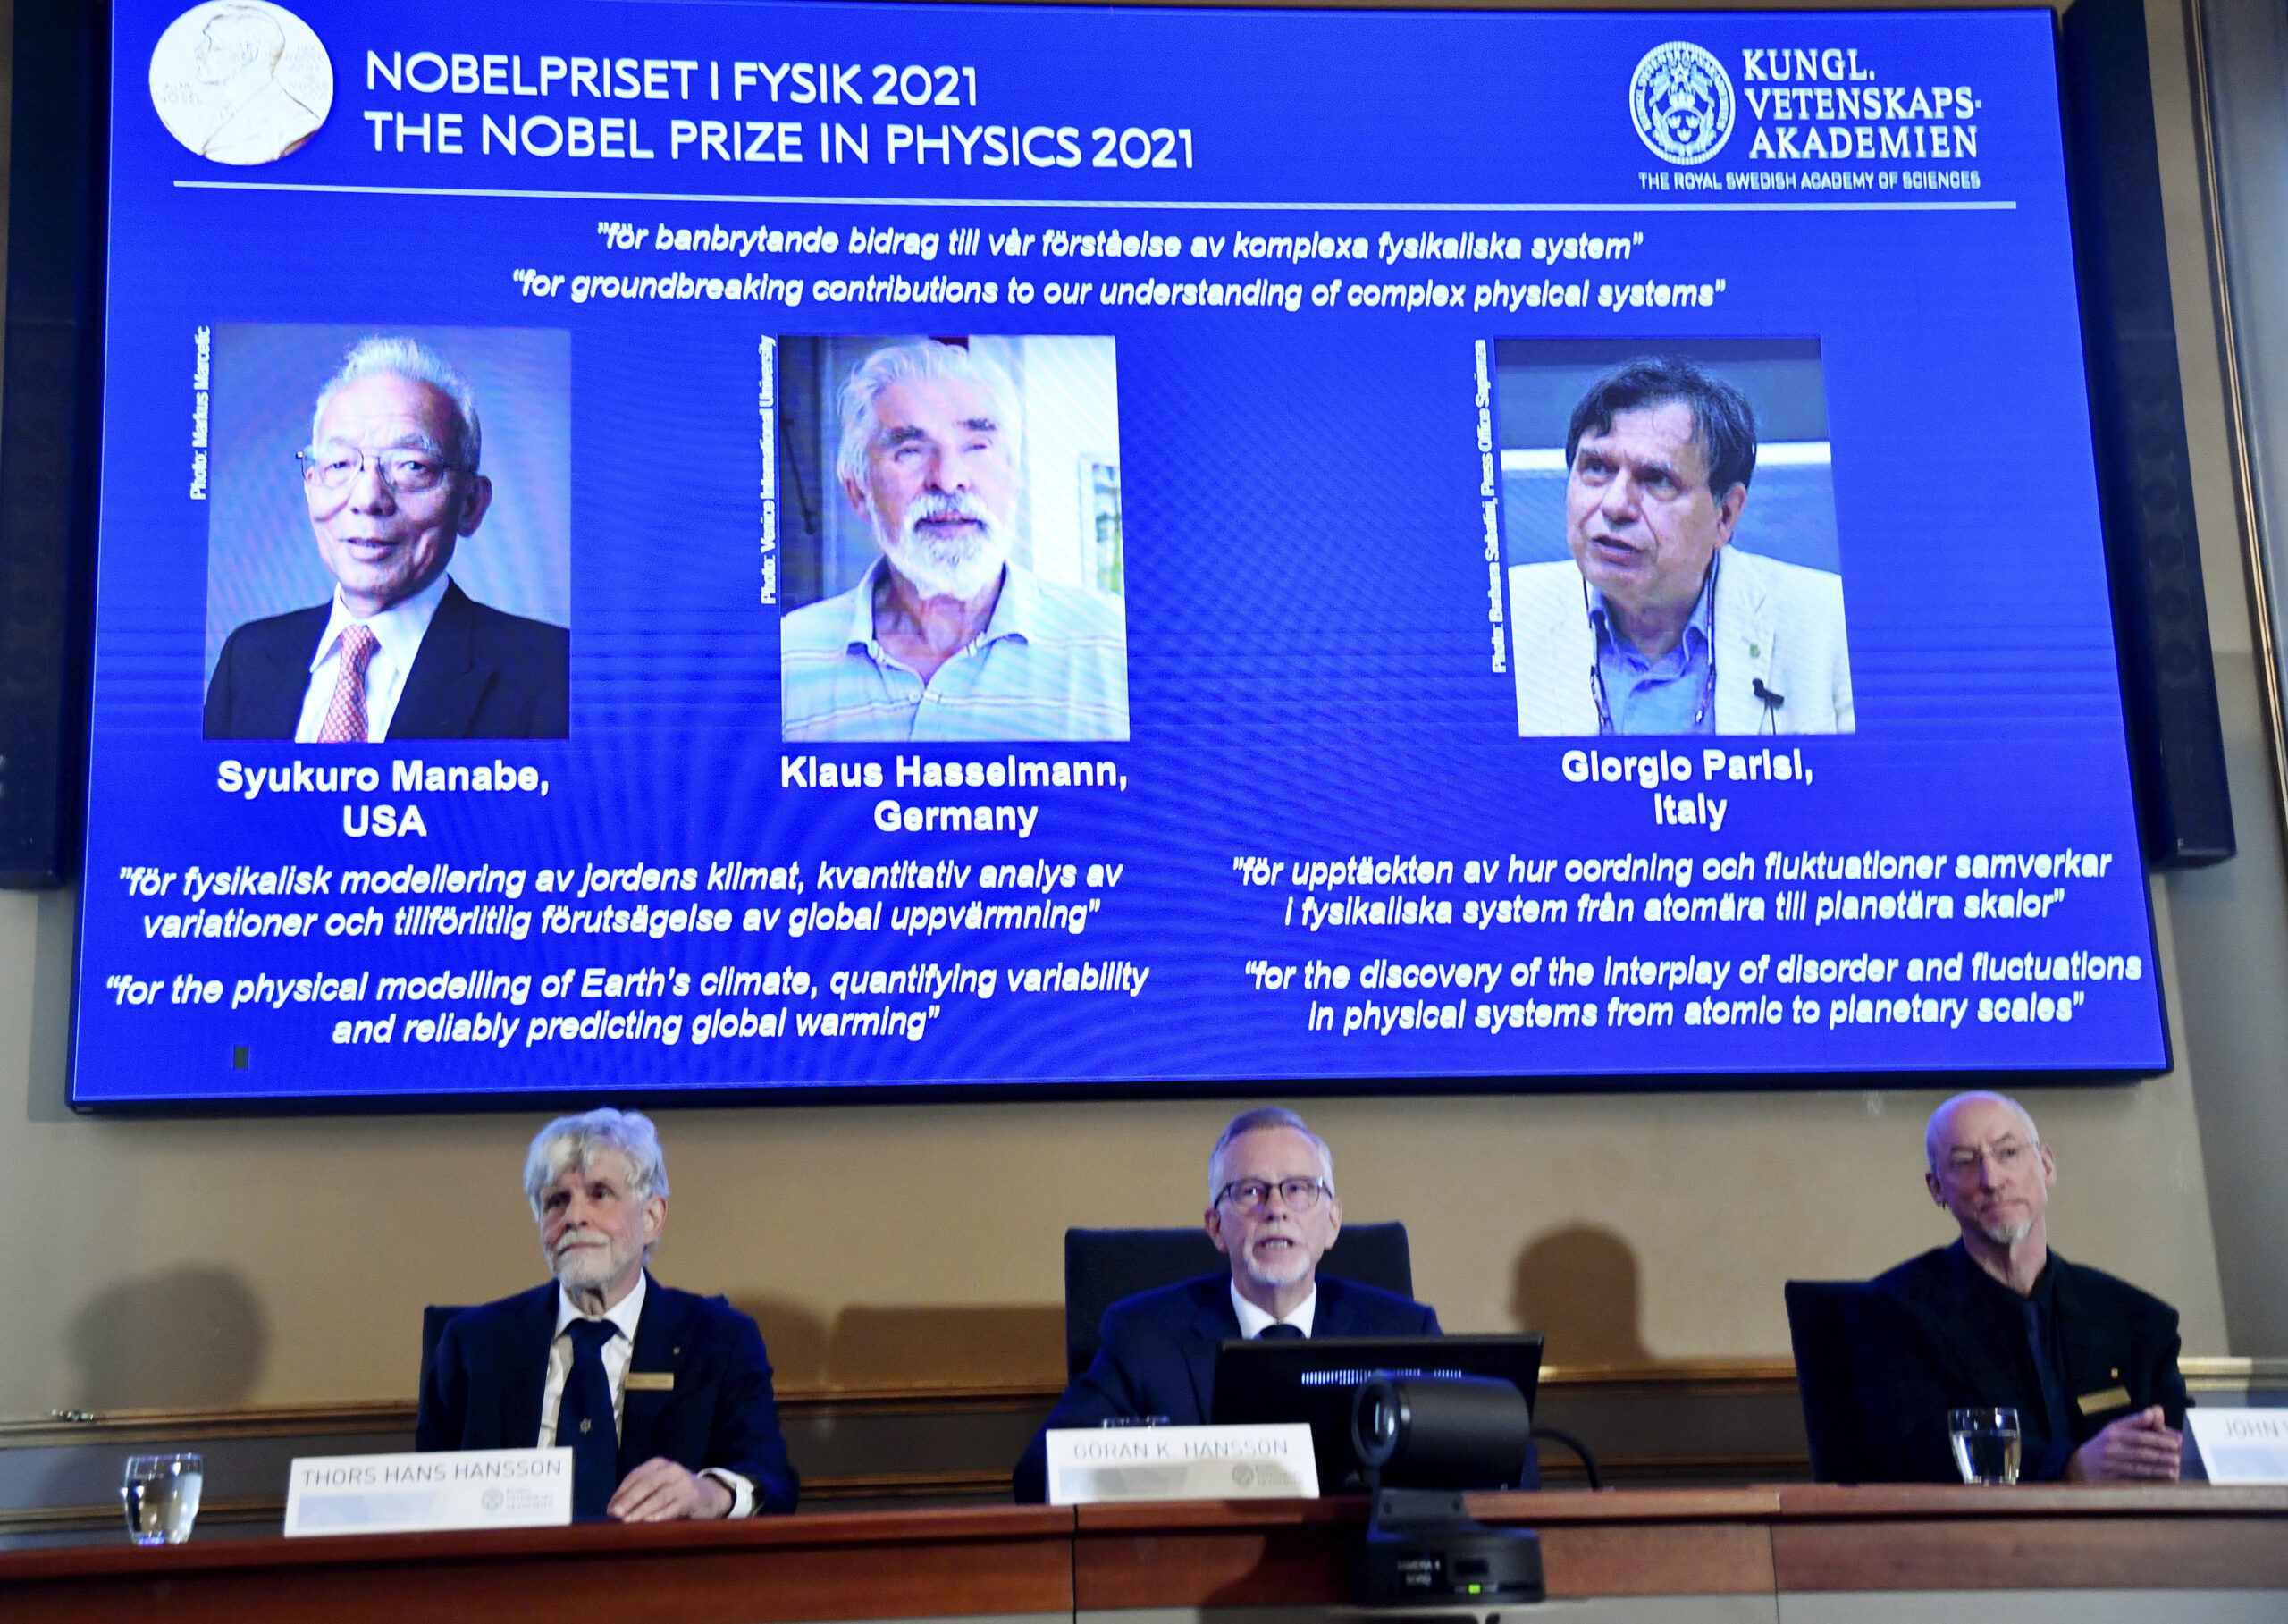 Secretary General of the Royal Swedish Academy of Sciences Goran Hansson, center, flanked at left by member of the Nobel Committee for Physics Thors Hans Hansson, left, and member of the Nobel Committee for Physics John Wettlaufer, right, announces the winners of the 2021 Nobel Prize in Physics at the Royal Swedish Academy of Sciences, in Stockholm, Sweden, Tuesday, Oct. 5, 2021. The Nobel Prize for physics has been awarded to scientists from Japan, Germany and Italy. Syukuro Manabe and Klaus Hasselmann were cited for their work in “the physical modeling of Earth’s climate, quantifying variability and reliably predicting global warming”. The second half of the prize was awarded to Giorgio Parisi for “the discovery of the interplay of disorder and fluctuations in physical systems from atomic to planetary scales.” (Pontus Lundahl/TT via AP)